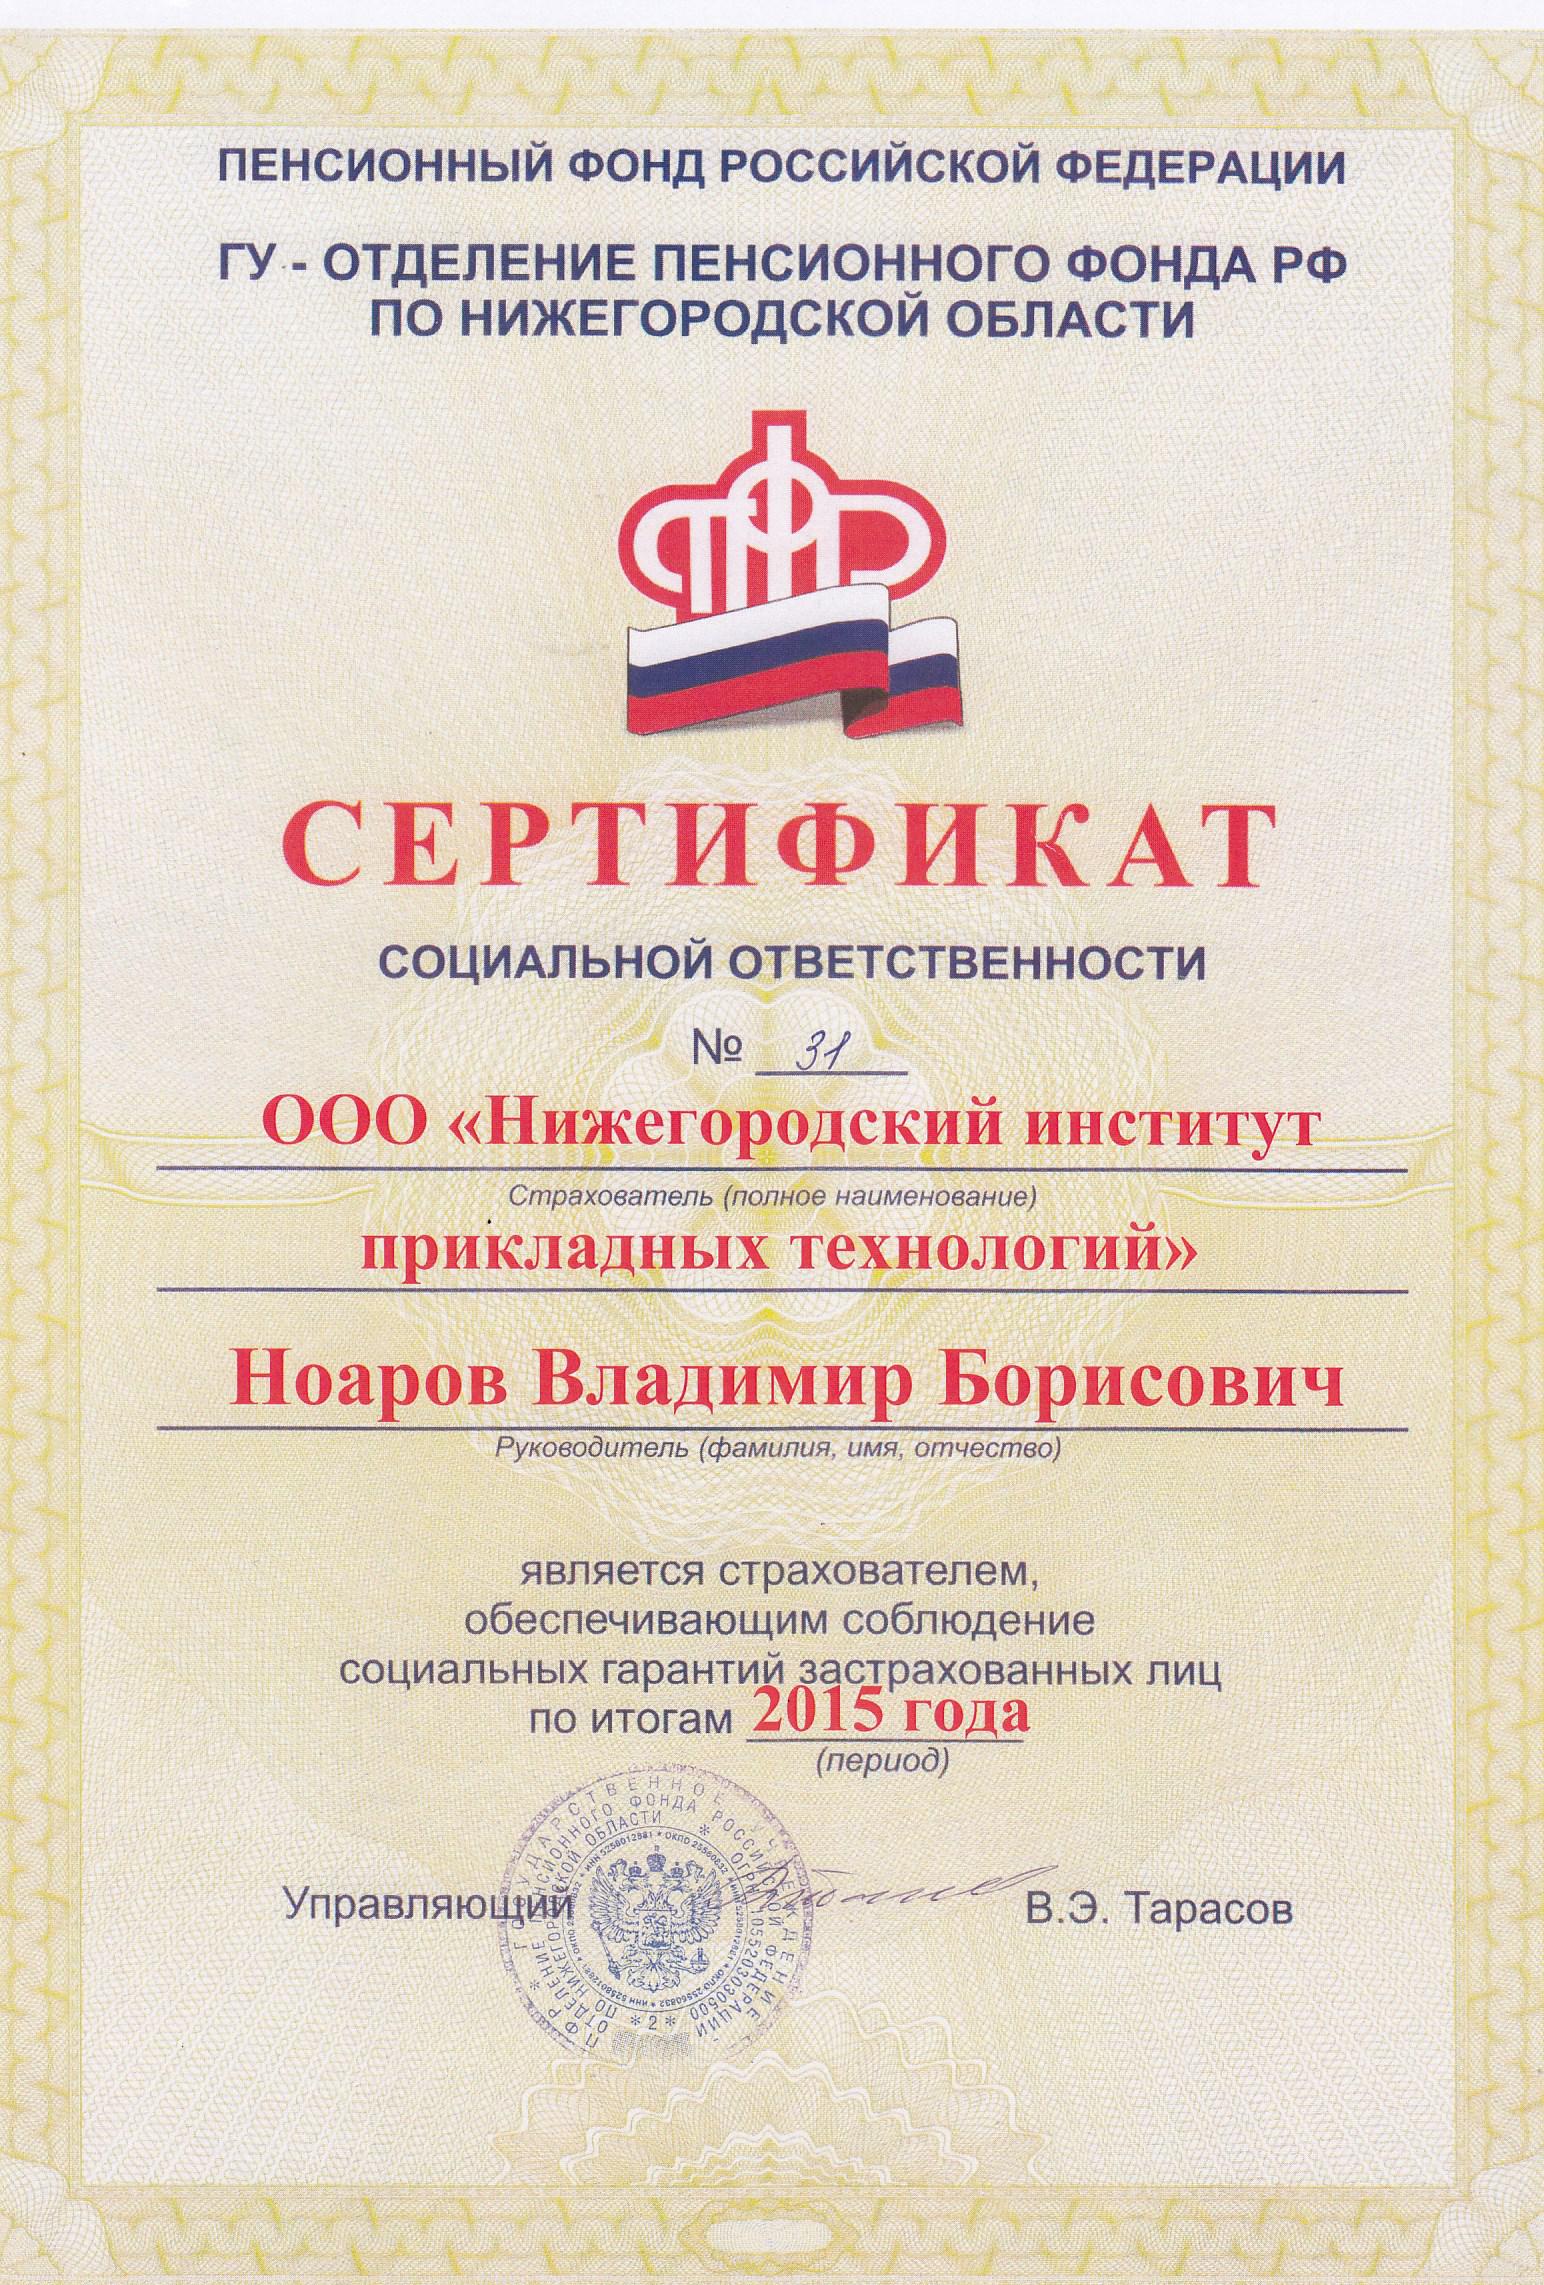 The company received social responsibility Certificate of timely and full payment of insurance